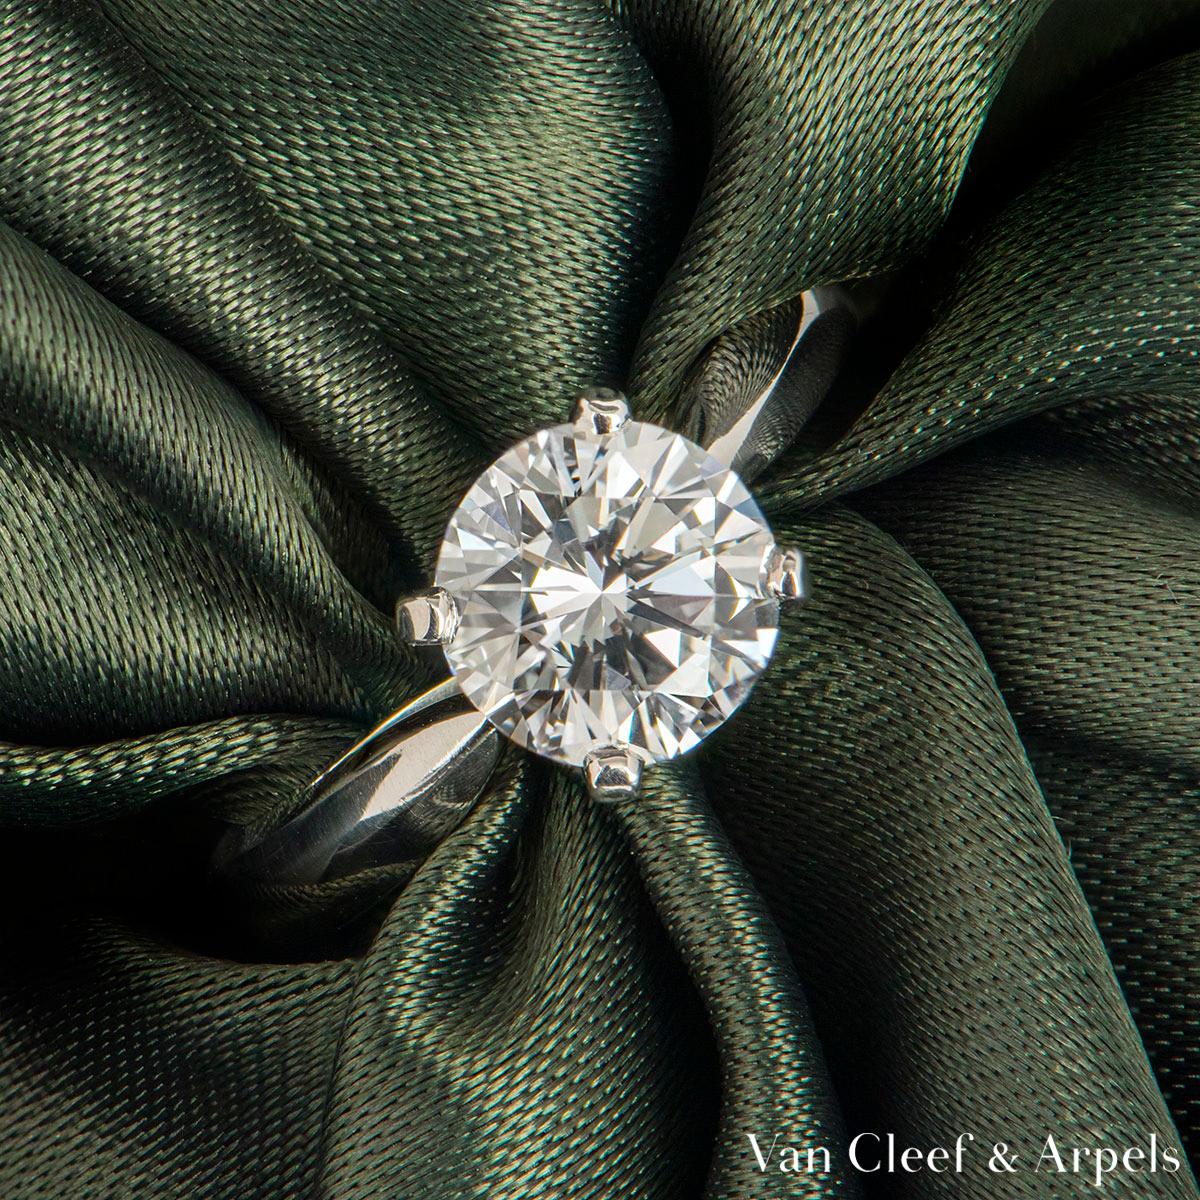 A beautiful platinum diamond ring by Van Cleef & Arpels from the Bonheur collection. The ring comprises of a round brilliant cut diamond in a four claw setting with a weight of 1.64ct, E colour and VVS2 clarity. The ring is a size UK K/US 5/EU 50